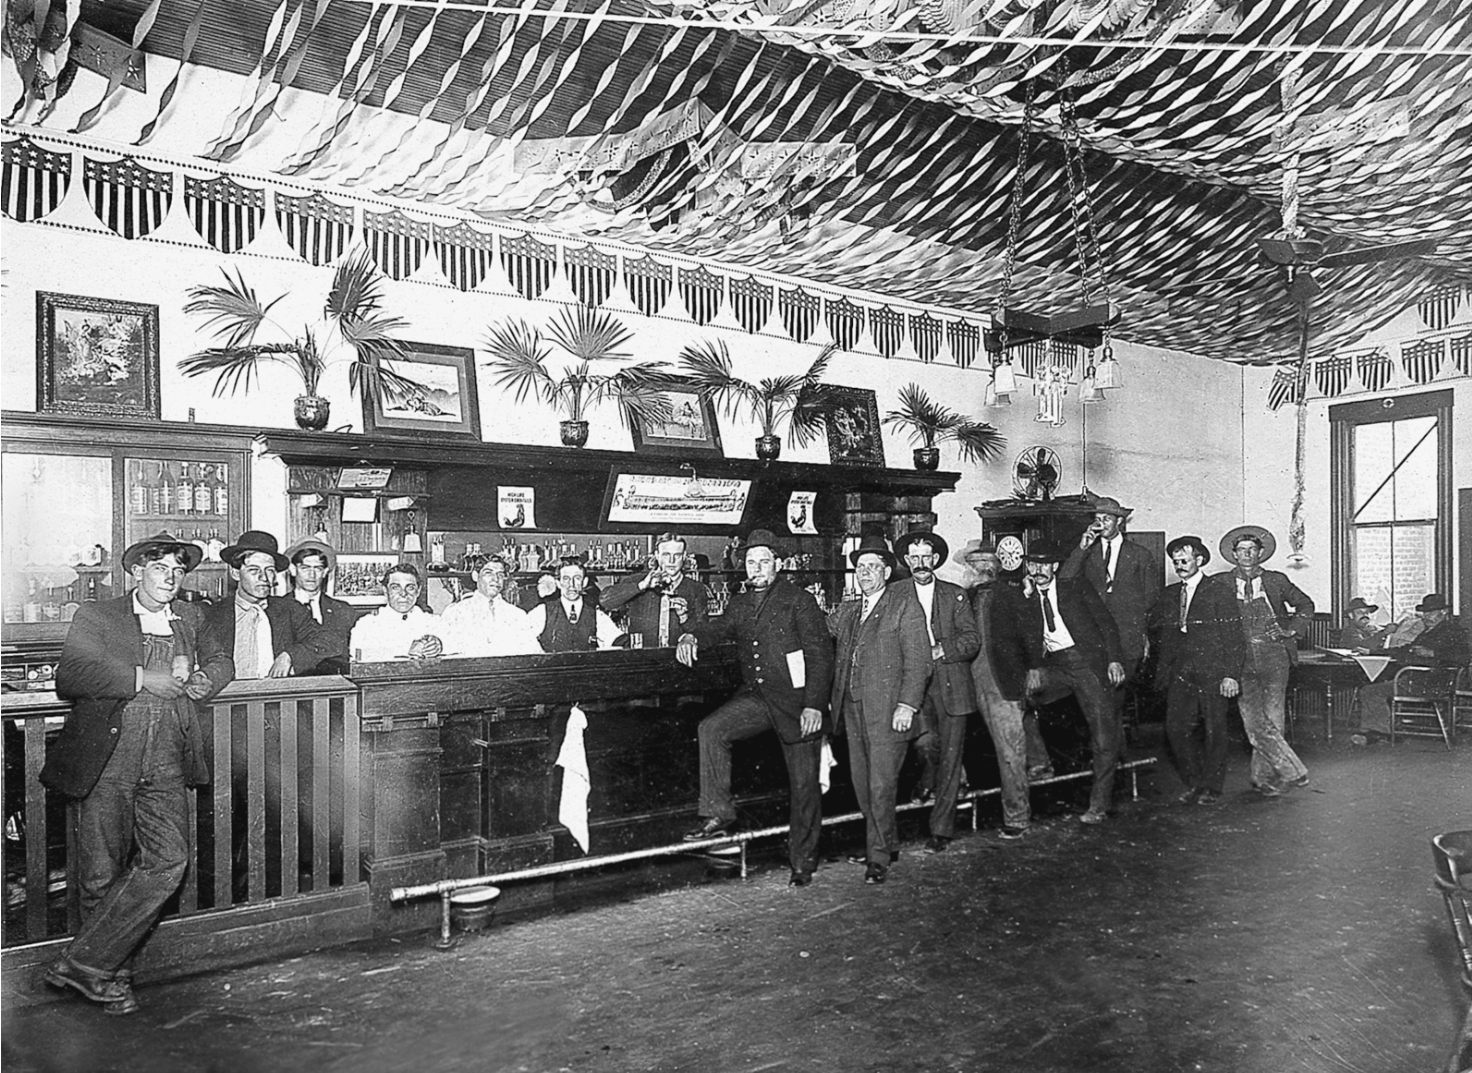 The Peerless Saloon is shown here celebrating Madera’s first Old Timers Day in 1931